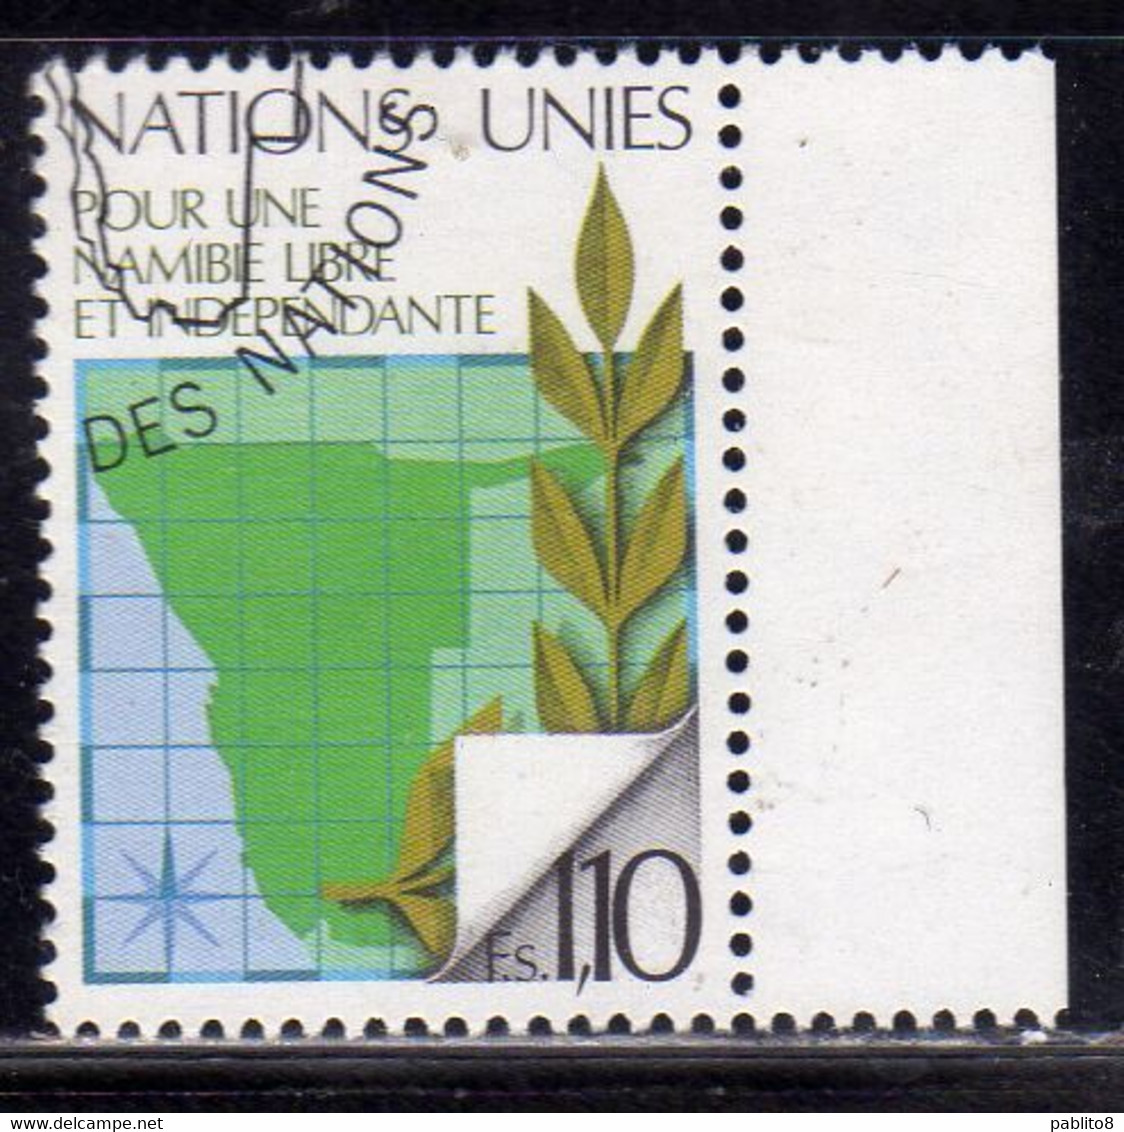 UNITED NATIONS GENEVE GINEVRA GENEVA ONU UN UNO 1979 NAMIBIA INDEPENDENT LIBRE INDEPENDANTE 1.10fr USATO USED OBLITERE' - Used Stamps